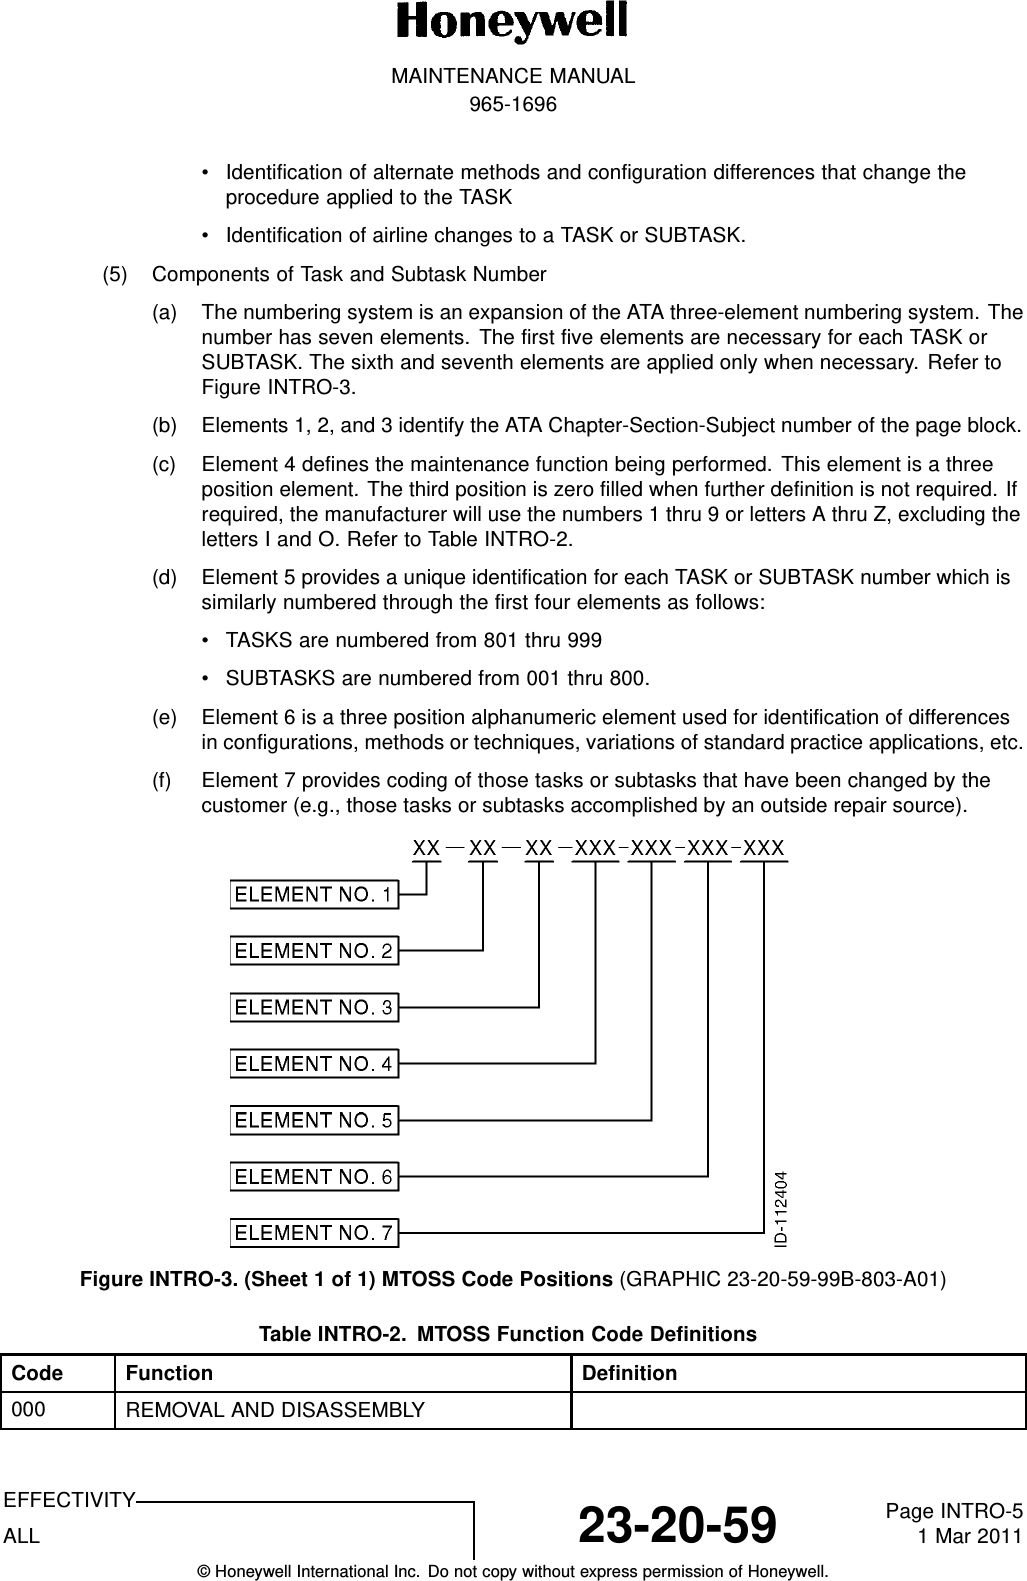 MAINTENANCE MANUAL965-1696• Identification of alternate methods and configuration differences that change theprocedure applied to the TASK• Identification of airline changes to a TASK or SUBTASK.(5) Components of Task and Subtask Number(a) The numbering system is an expansion of the ATA three-element numbering system. Thenumber has seven elements. The first five elements are necessary for each TASK orSUBTASK. The sixth and seventh elements are applied only when necessary. Refer toFigure INTRO-3.(b) Elements 1, 2, and 3 identify the ATA Chapter-Section-Subject number of the page block.(c) Element 4 defines the maintenance function being performed. This element is a threeposition element. The third position is zero filled when further definition is not required. Ifrequired, the manufacturer will use the numbers 1 thru 9 or letters A thru Z, excluding theletters I and O. Refer to Table INTRO-2.(d) Element 5 provides a unique identification for each TASK or SUBTASK number which issimilarly numbered through the first four elements as follows:• TASKS are numbered from 801 thru 999• SUBTASKS are numbered from 001 thru 800.(e) Element 6 is a three position alphanumeric element used for identification of differencesin configurations, methods or techniques, variations of standard practice applications, etc.(f) Element 7 provides coding of those tasks or subtasks that have been changed by thecustomer (e.g., those tasks or subtasks accomplished by an outside repair source).Figure INTRO-3. (Sheet 1 of 1) MTOSS Code Positions (GRAPHIC 23-20-59-99B-803-A01)Table INTRO-2. MTOSS Function Code DefinitionsCode Function Definition000 REMOVAL AND DISASSEMBLYEFFECTIVITYALL 23-20-59 Page INTRO-51 Mar 2011© Honeywell International Inc. Do not copy without express permission of Honeywell.